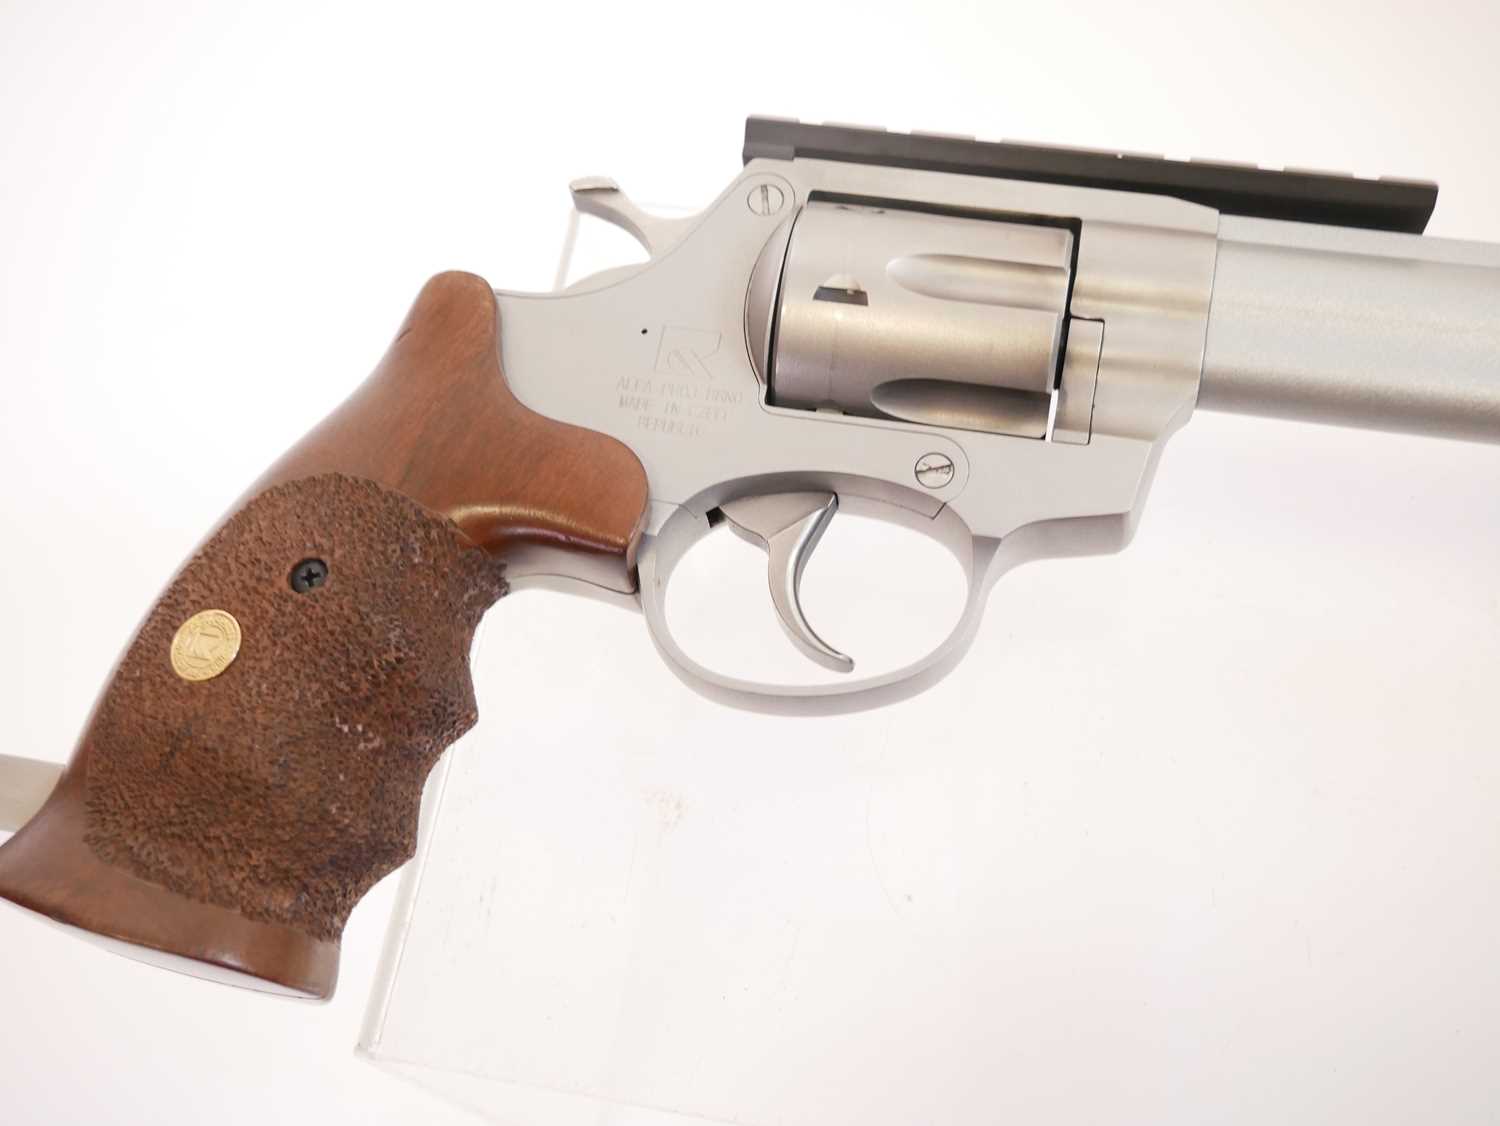 Alfa Brno .357 long barrel revolver, serial number 7351200627, 12 inch barrel, fitted with Picatinny - Image 2 of 13